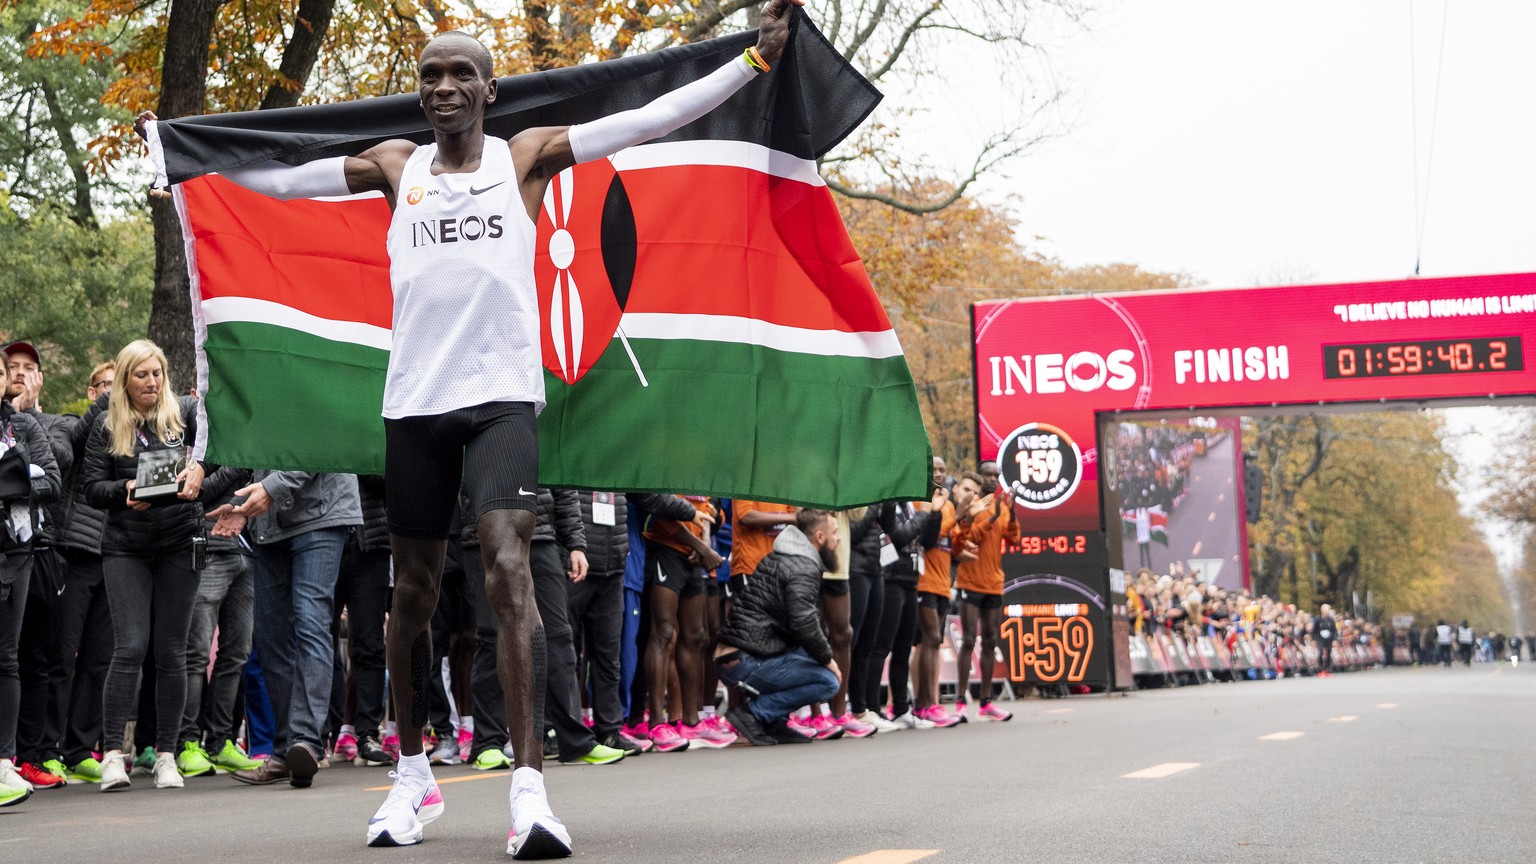 epa07914793 Eliud Kipchoge, Kenyan marathon world record holder, celebrates with the flag of Kenya in front of the finish line after the INEOS 1:59 Challenge in Vienna, Austria, 12 October 2019. Kipch ...